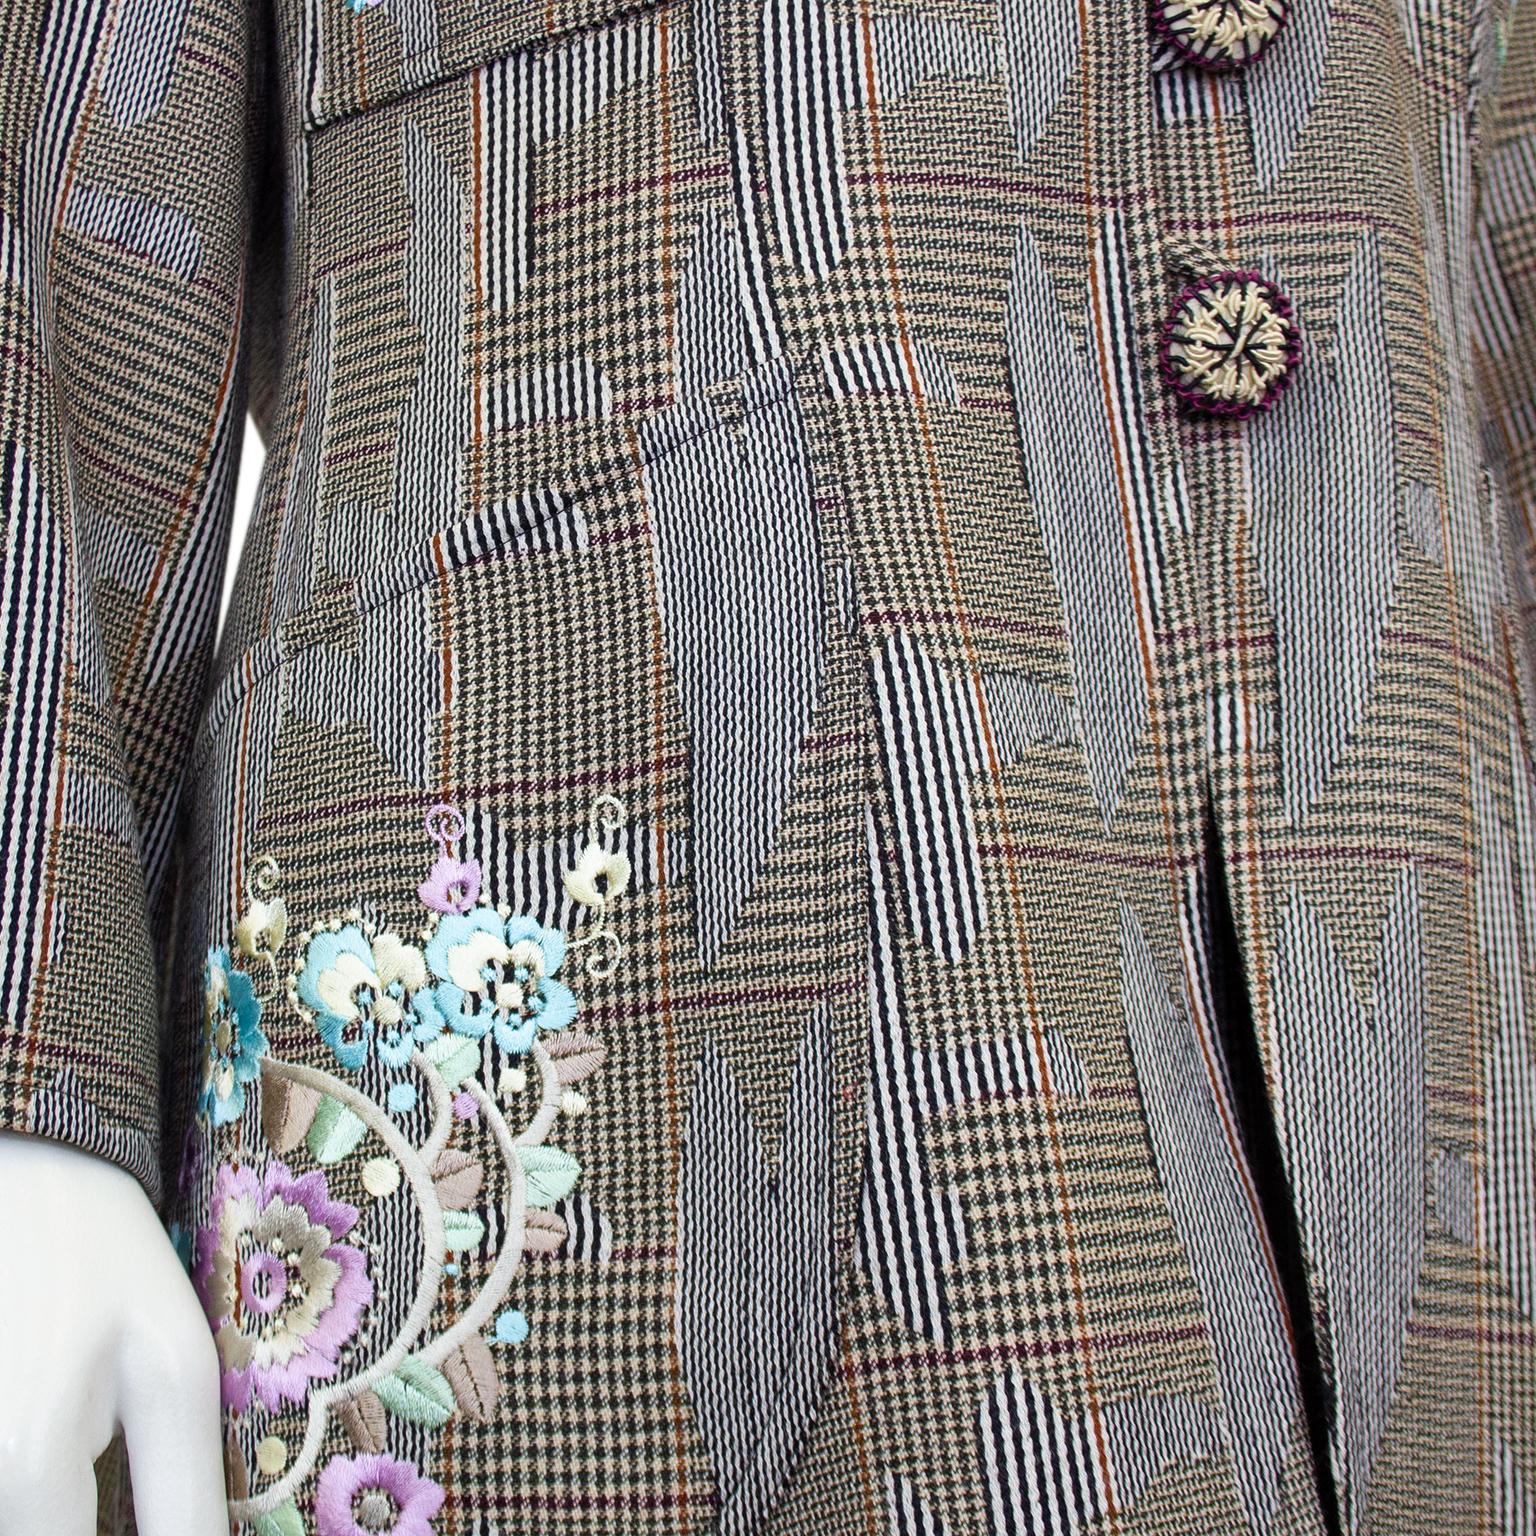 Women's 1990s Christian Lacroix Tweed Suit With Embroidery For Sale